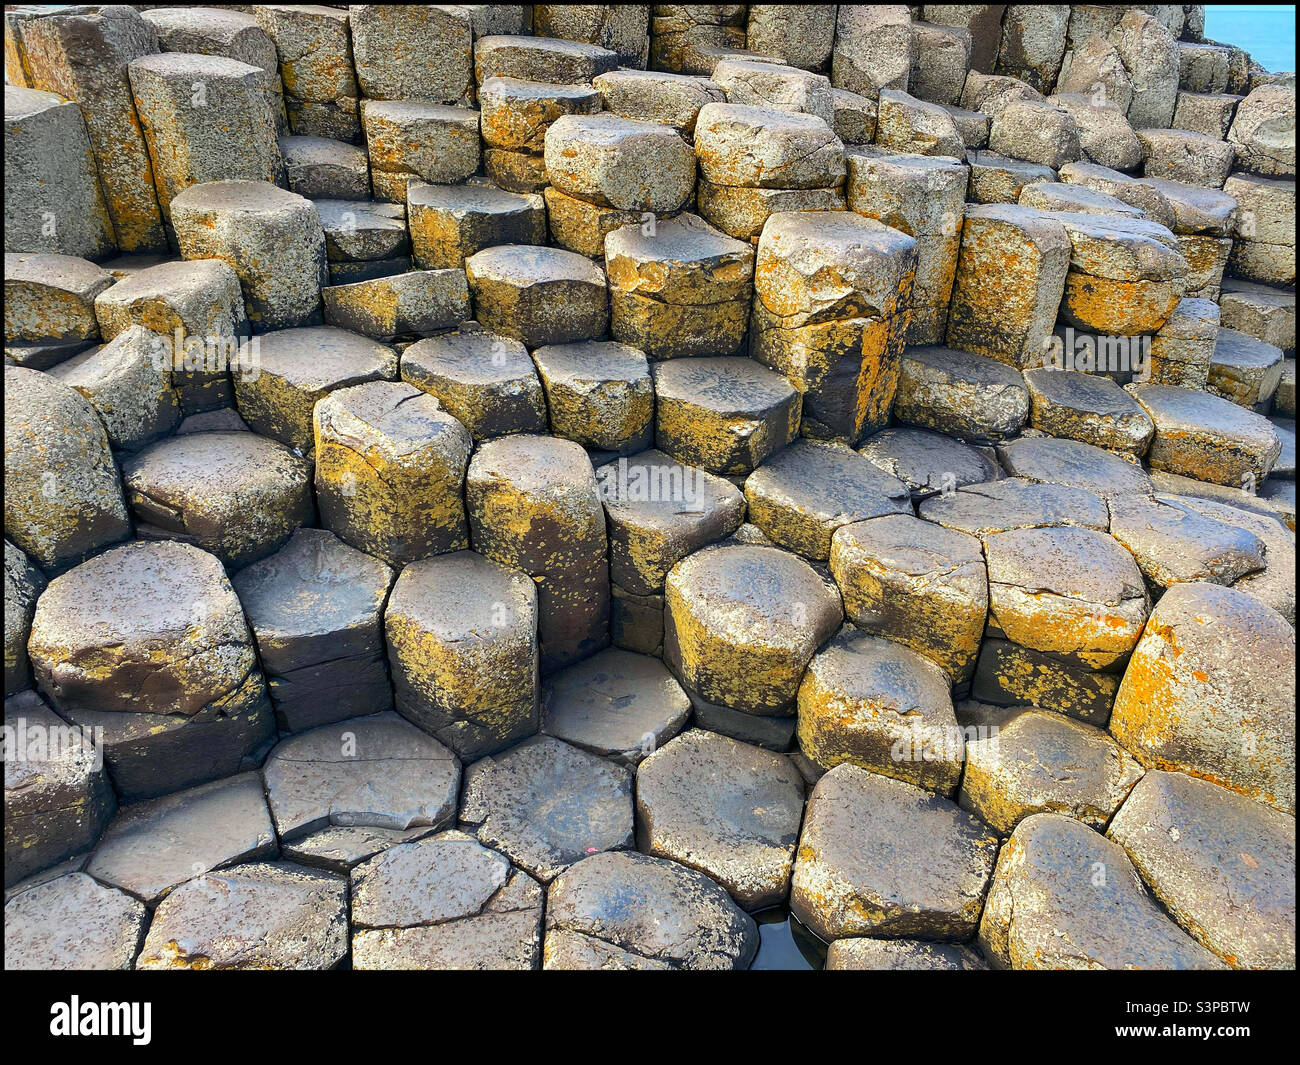 The iconic shapes of the hexagonal volcanic rock columns that form the topography at Giant’s Causeway in Northern Ireland. This famous location is visited by approx. 1 million people annually. ©️ CH. Stock Photo